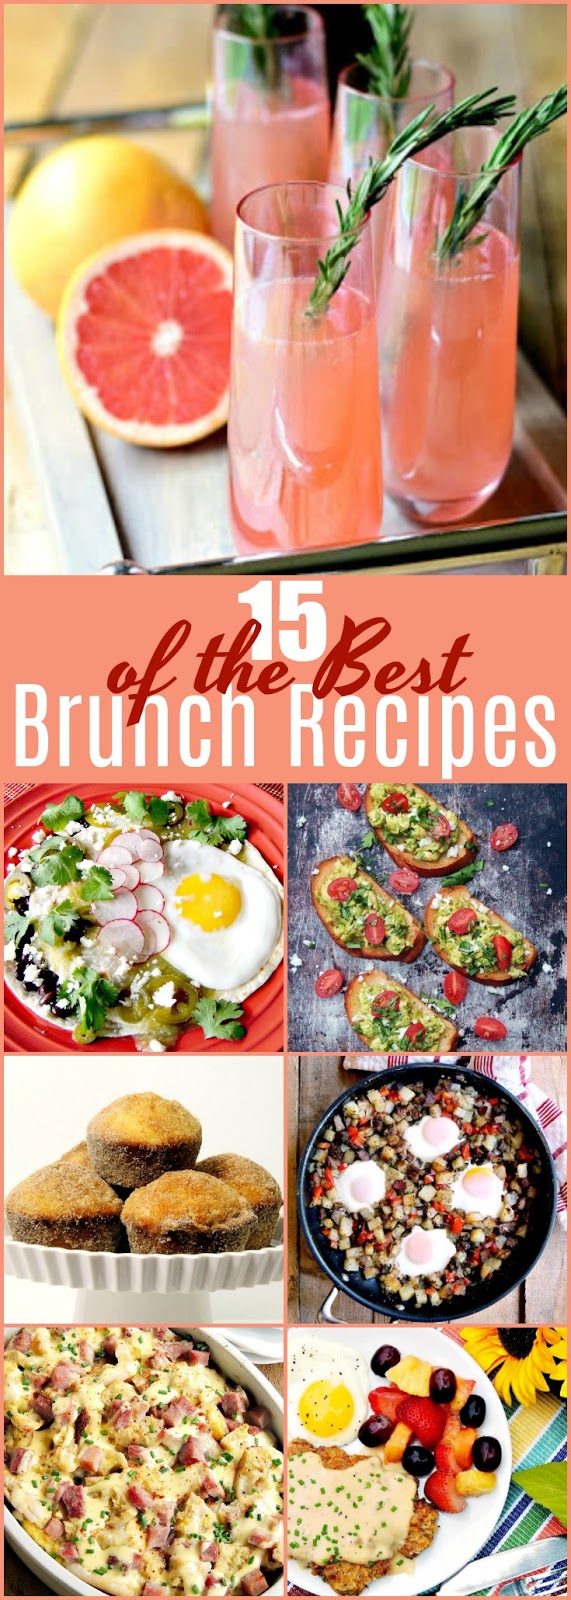 15 of the Best Brunch Recipes Collage